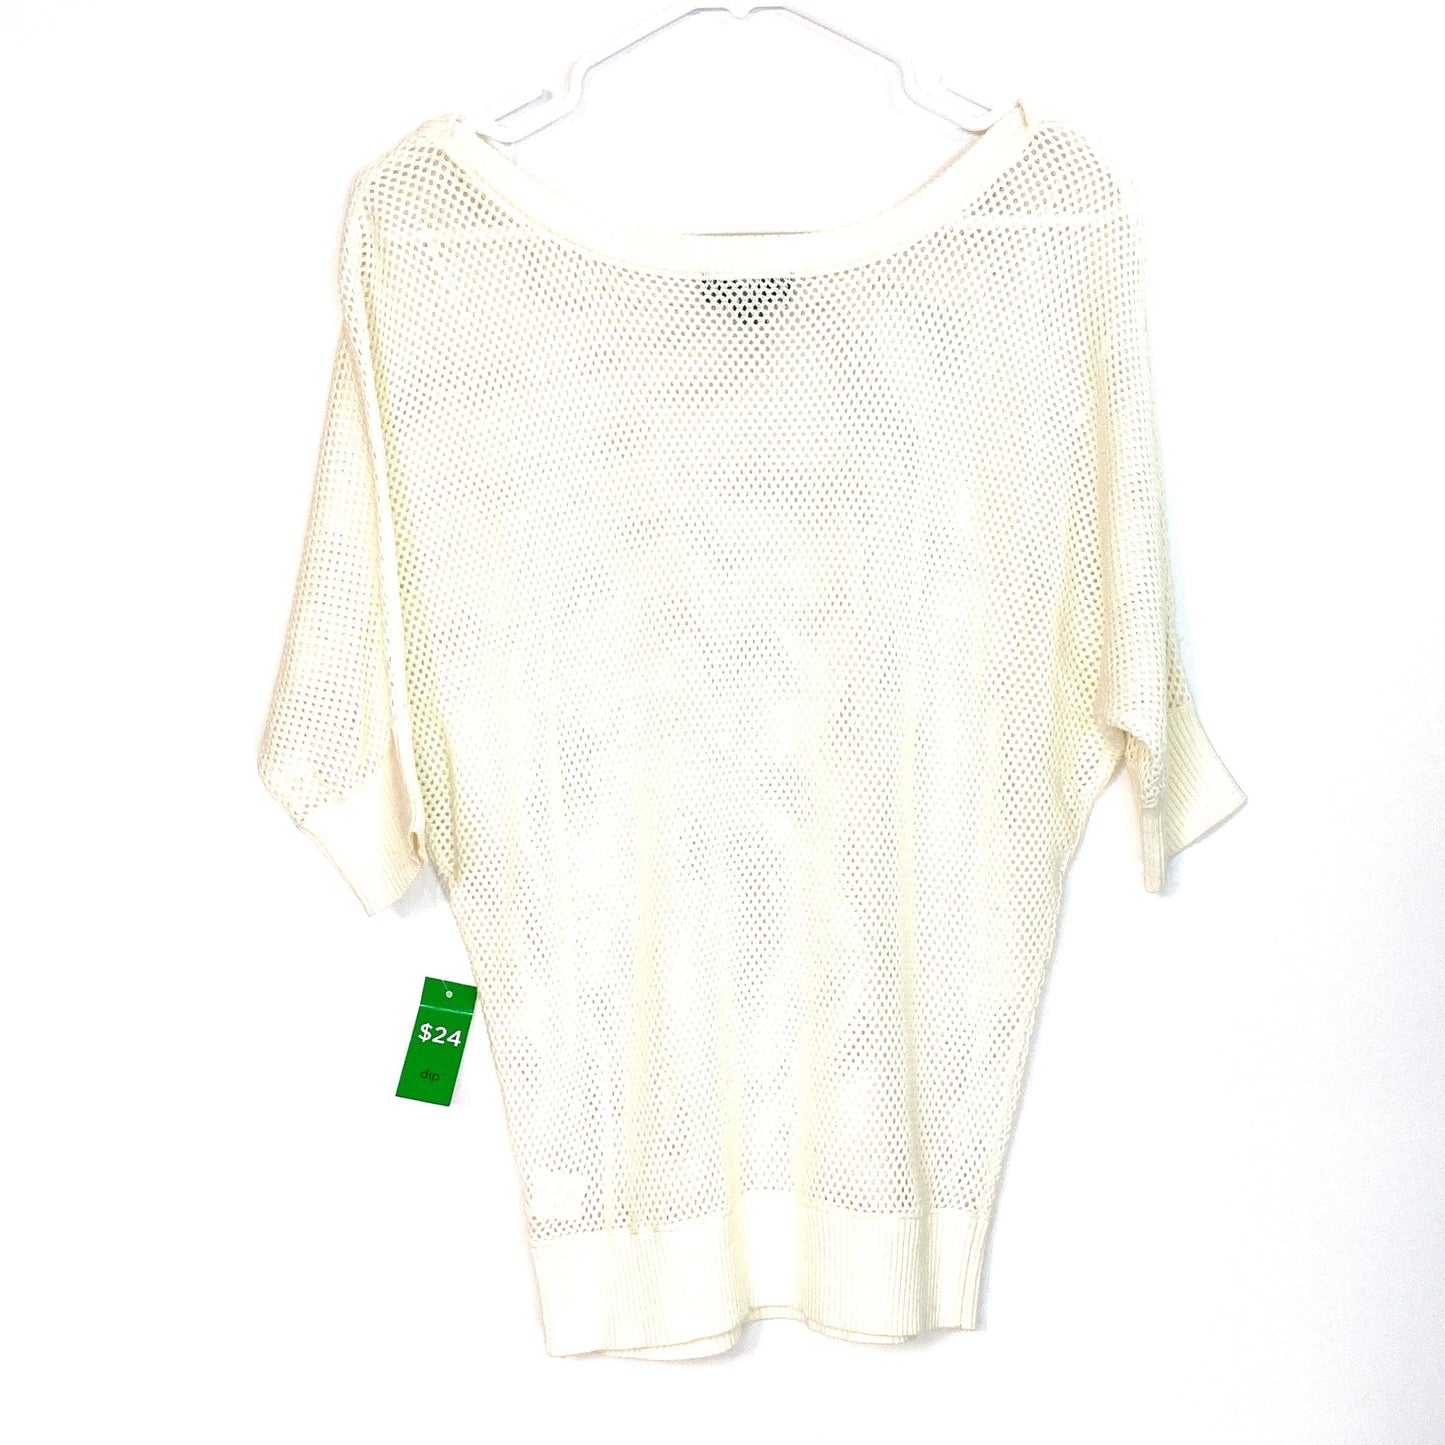 Dip Womens Size S White Mesh Sweater Top ½ Sleeve NWT